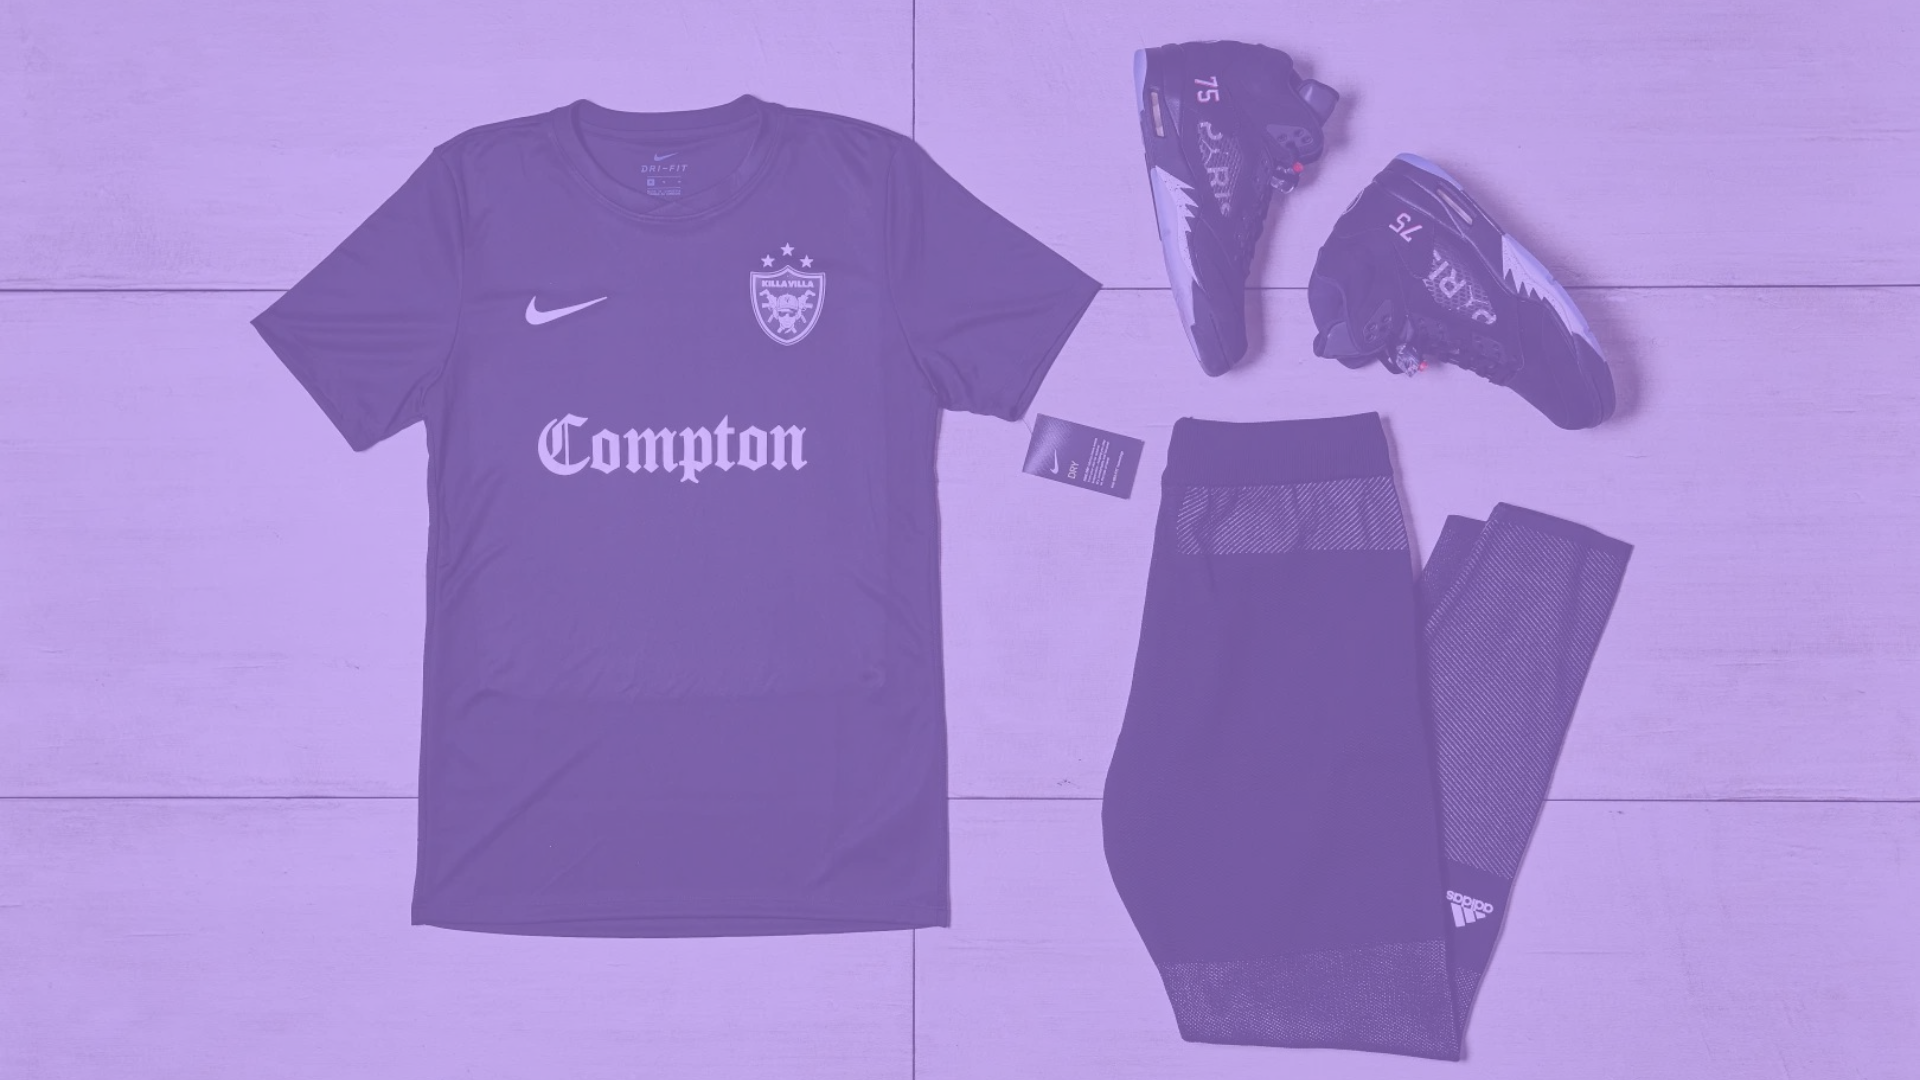 These N.W.A Concept Kits are glorious